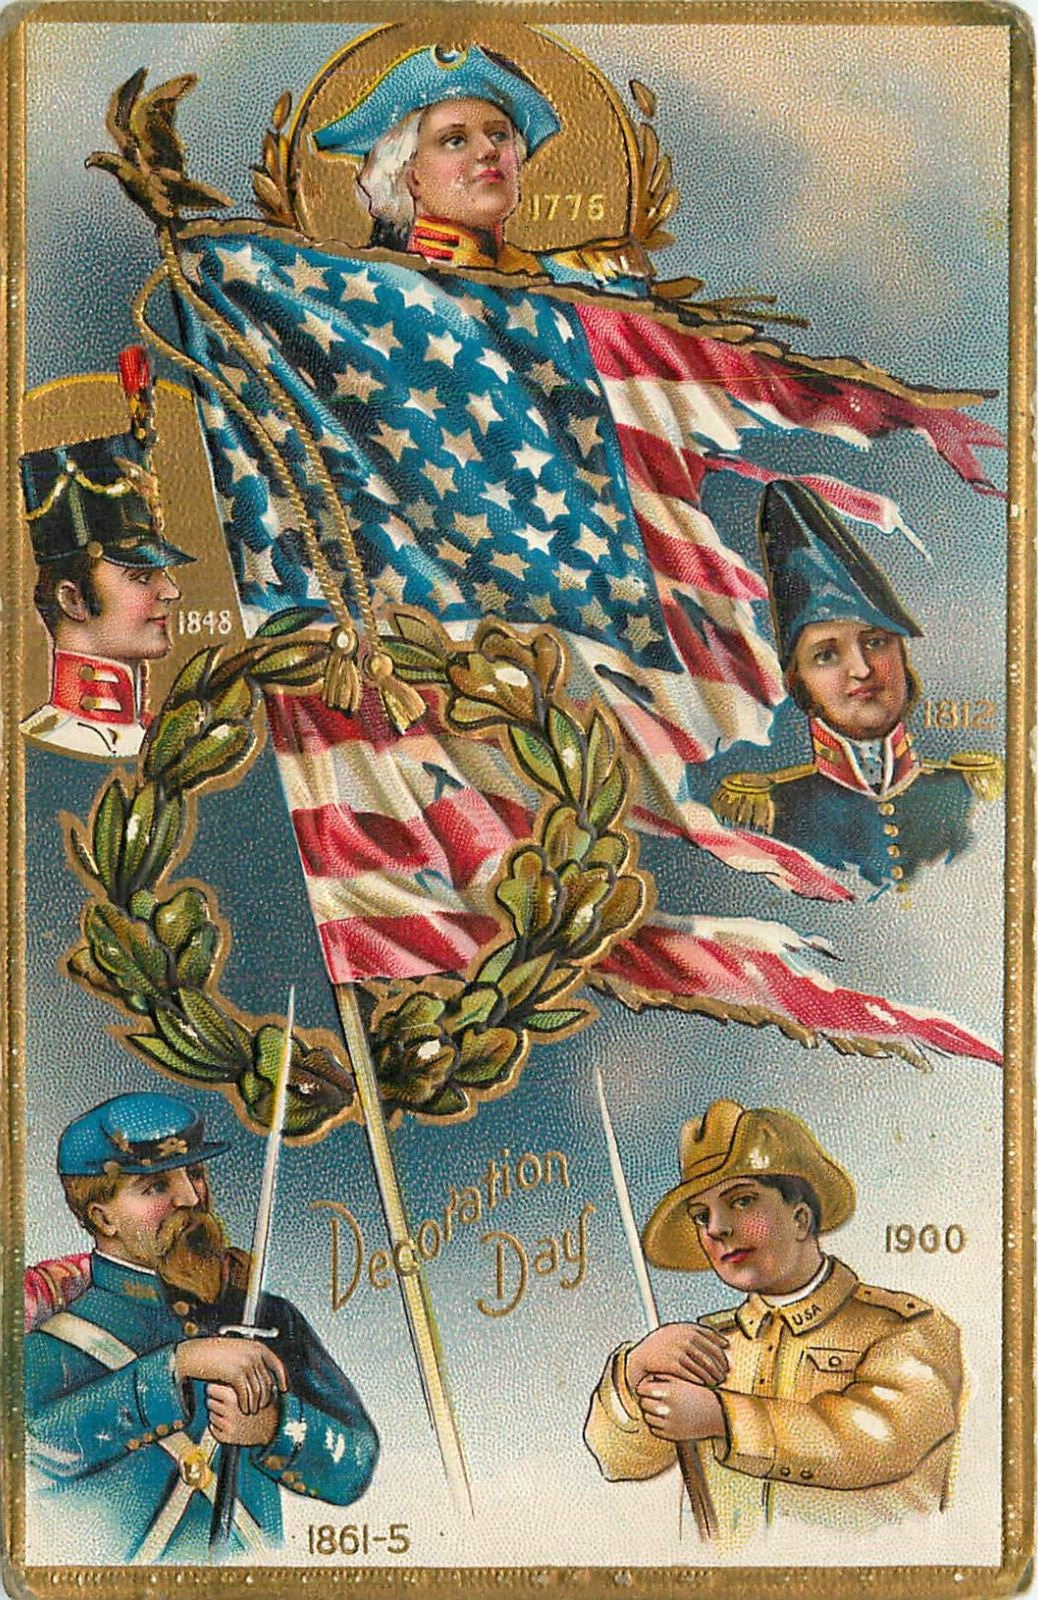 c1910 Decoration Day - Montage of US Soldiers from Wars Postcard